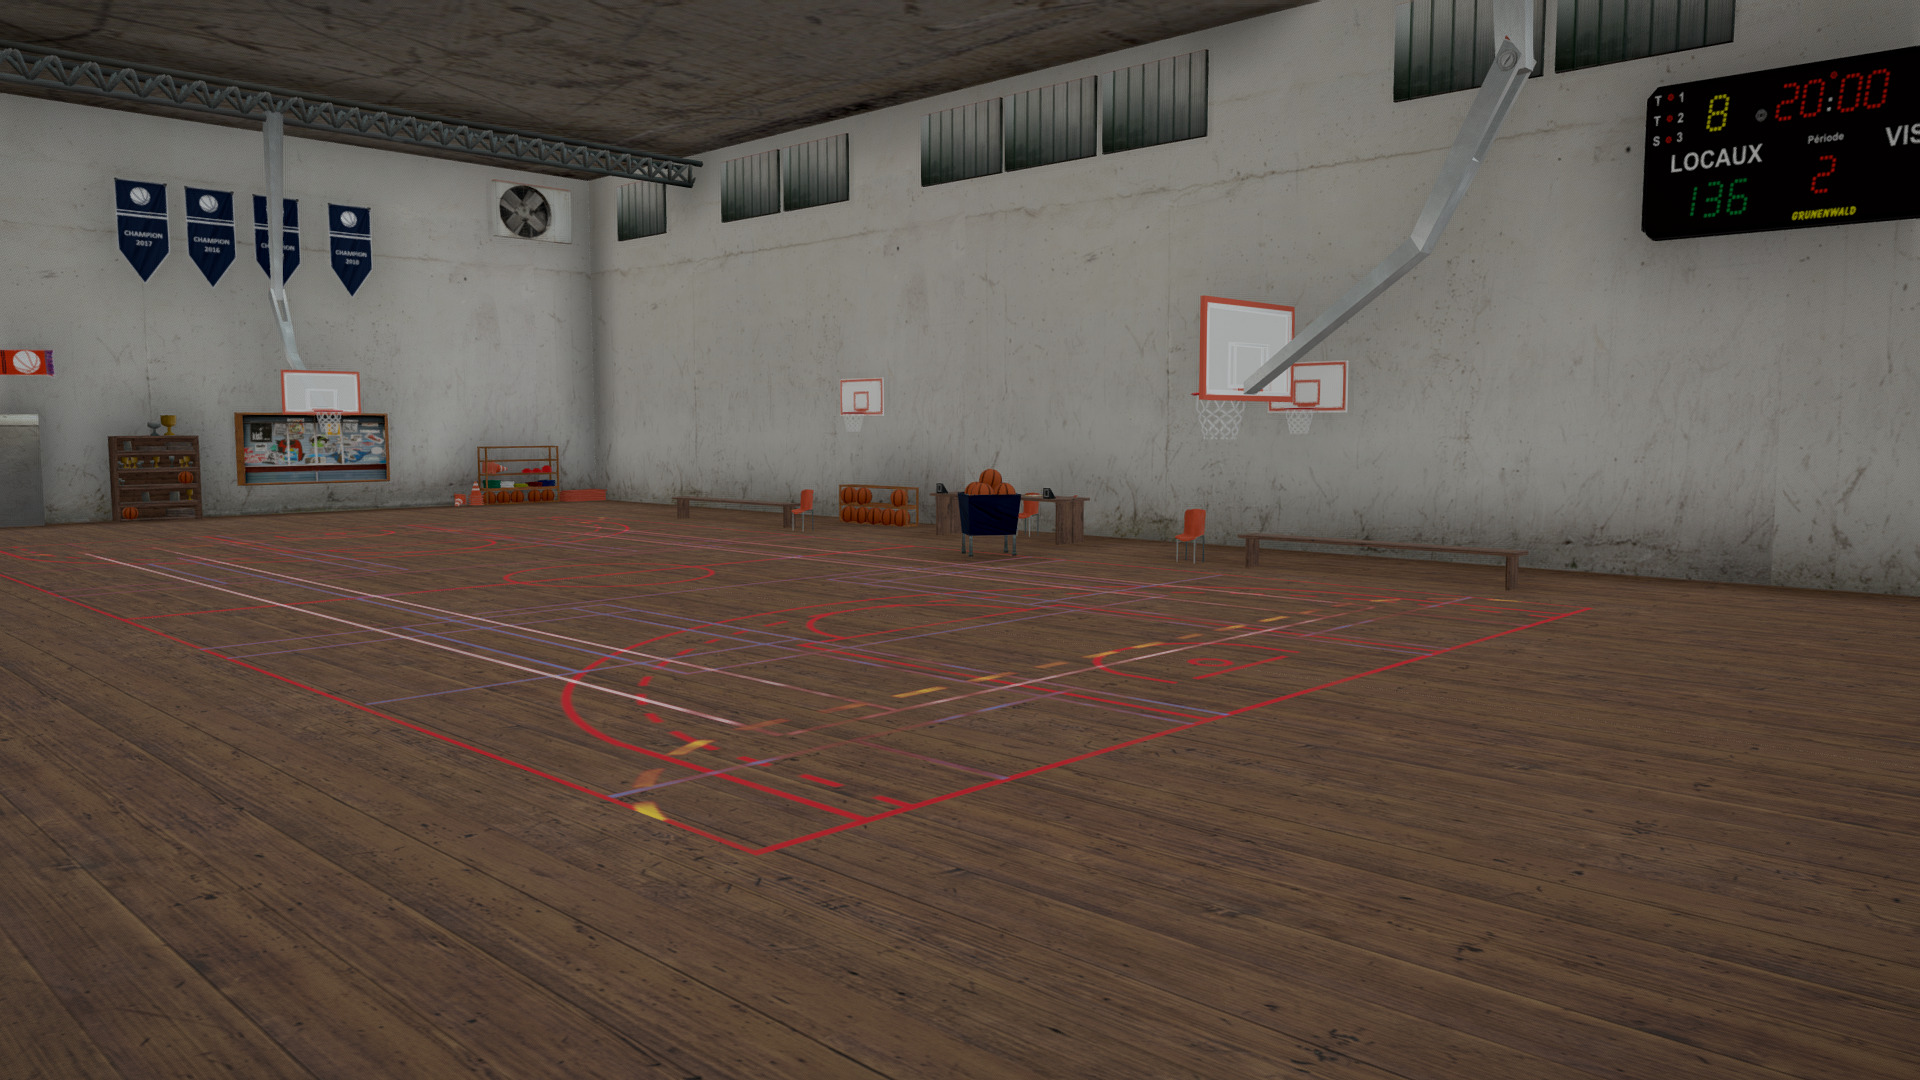 3D model Streetball - This is a 3D model of the Streetball. The 3D model is about a basketball court with a basketball hoop.